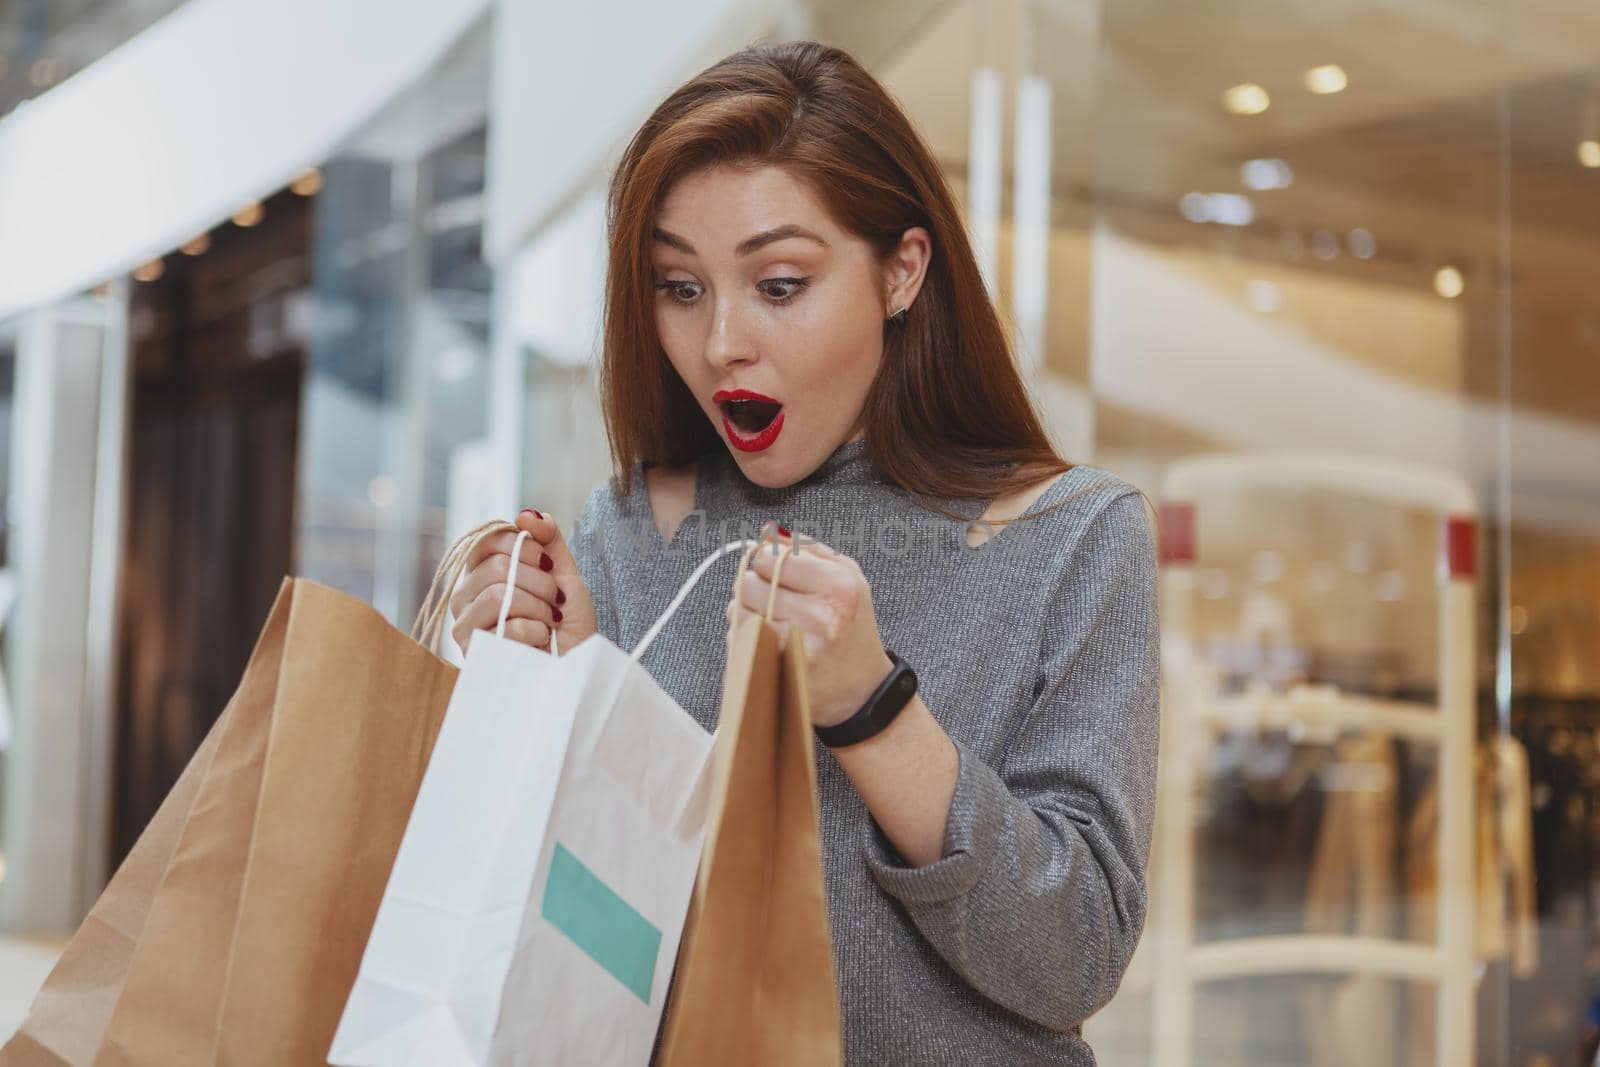 Beautiful overwhelmed woman looking inside a shopping bag at the mall. Attractive female cusotmer looking surprised, checking out her purchase in a paper bag, copy space. Sale, low price concept